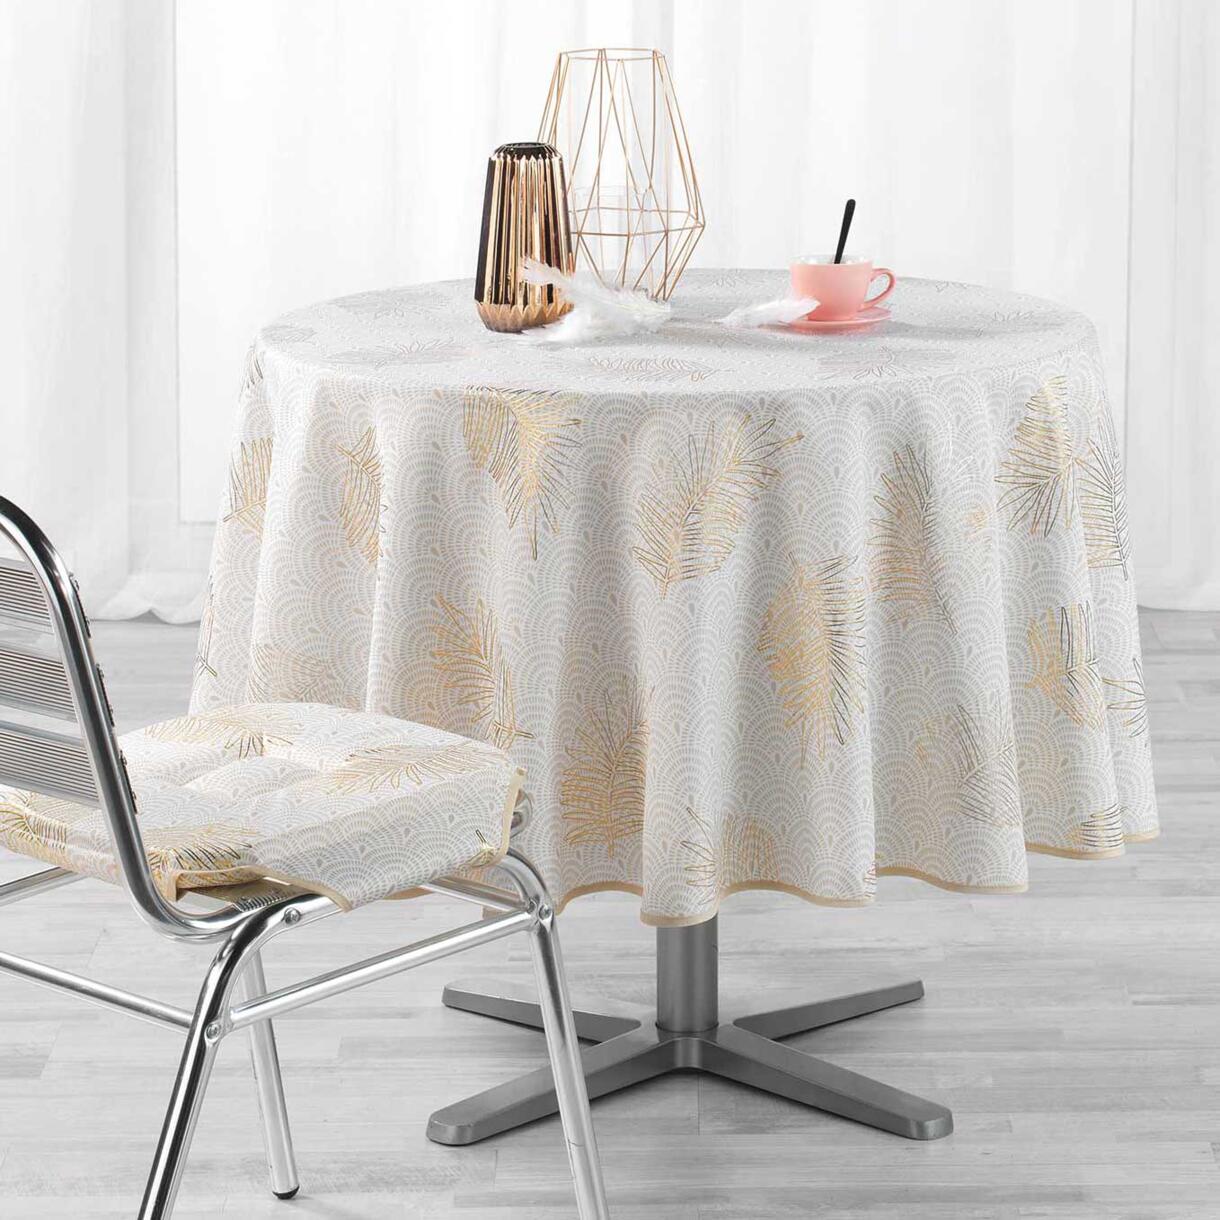 Nappe ronde (D180 cm) Sunny Gold Or 1